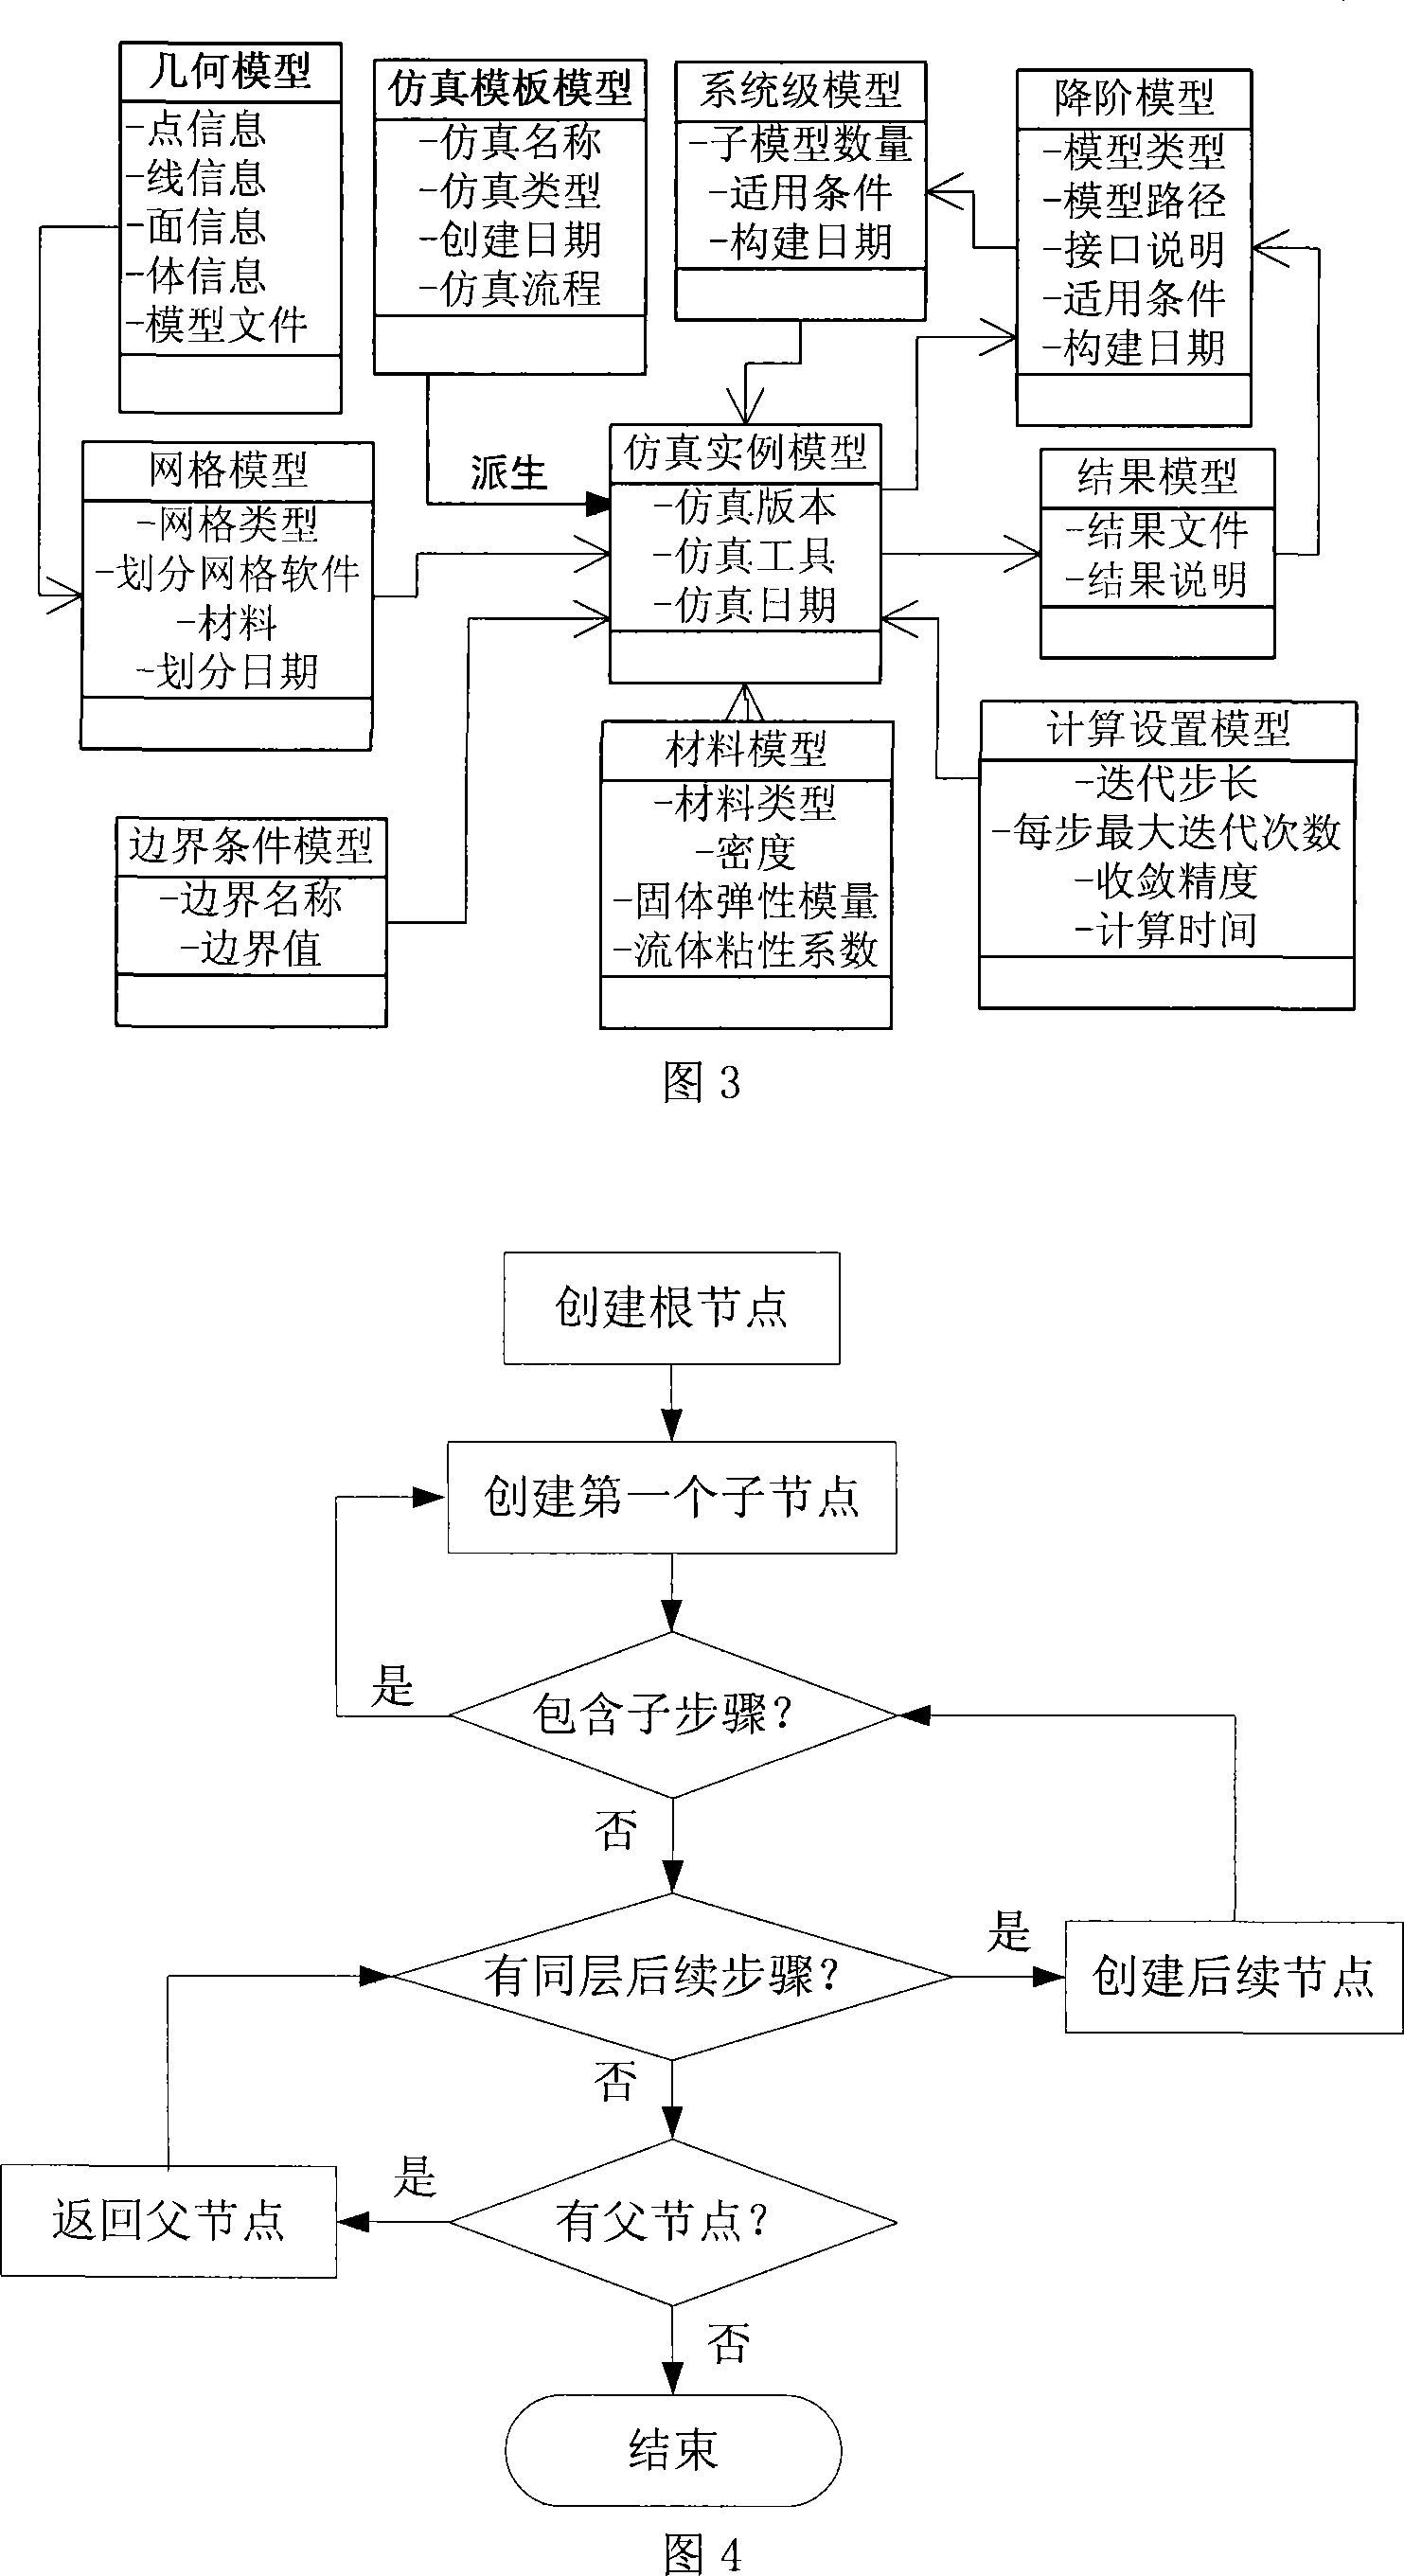 Emulated procedure information modeling and maintenance method based on product structural tree